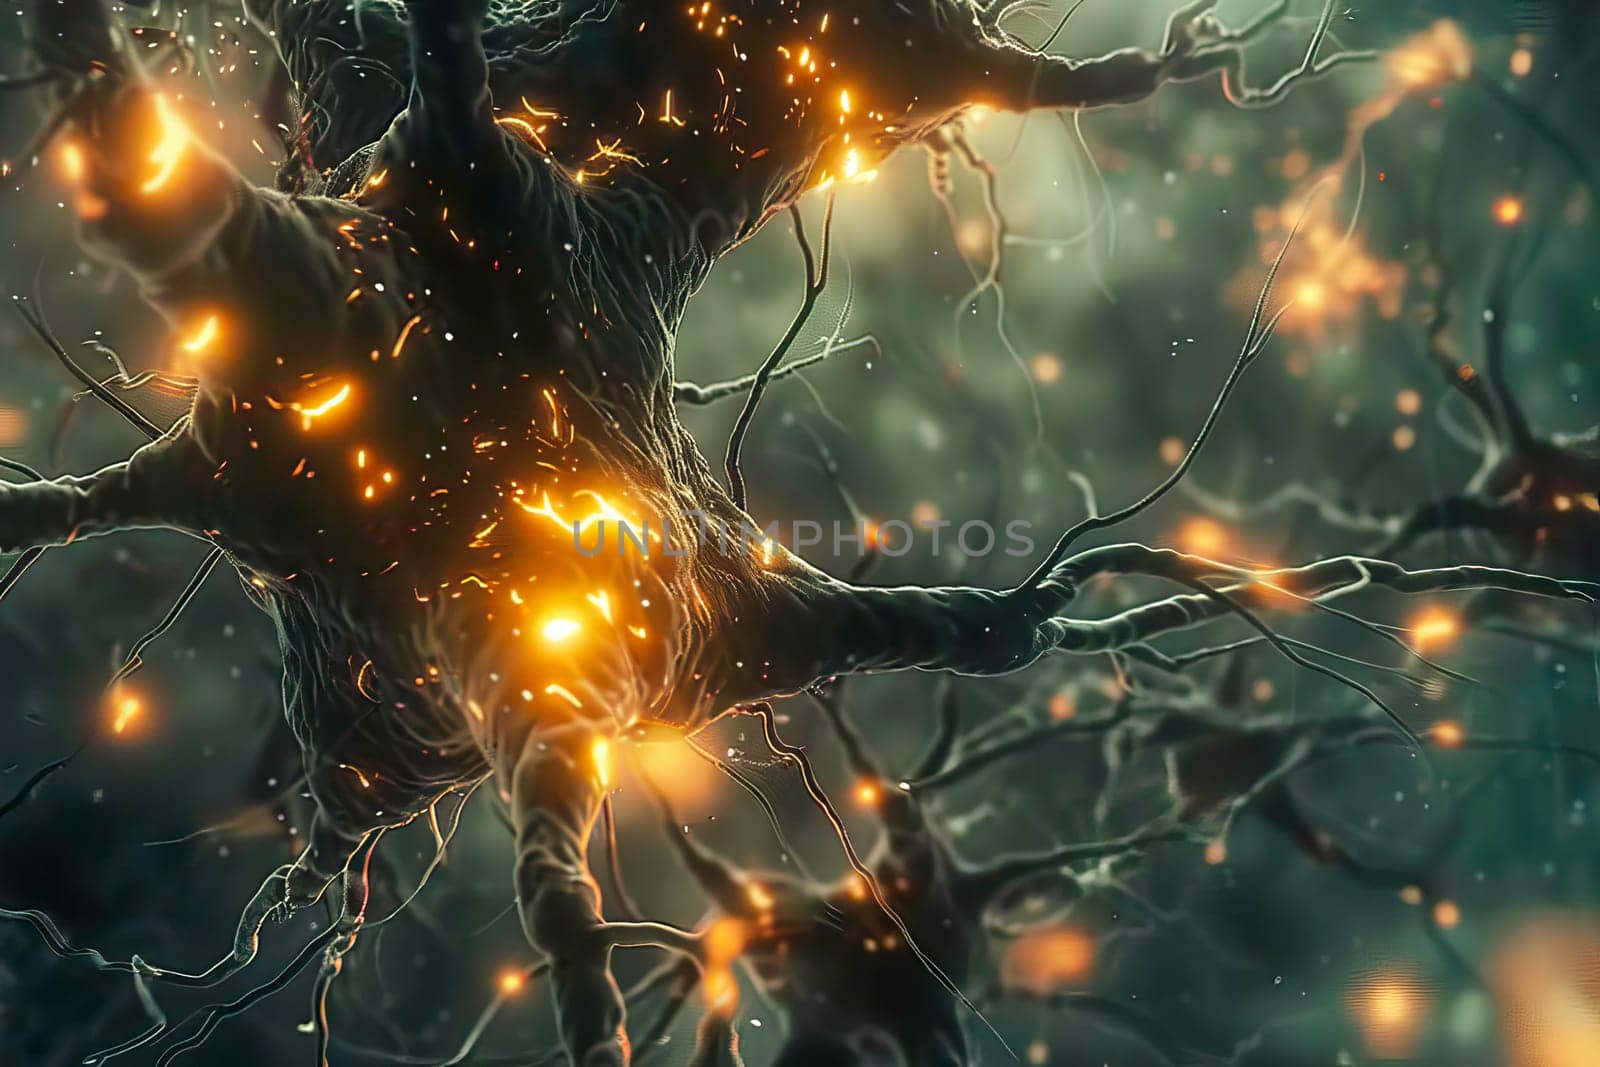 Neurons in the human brain with bright signals indicating synaptic activity.